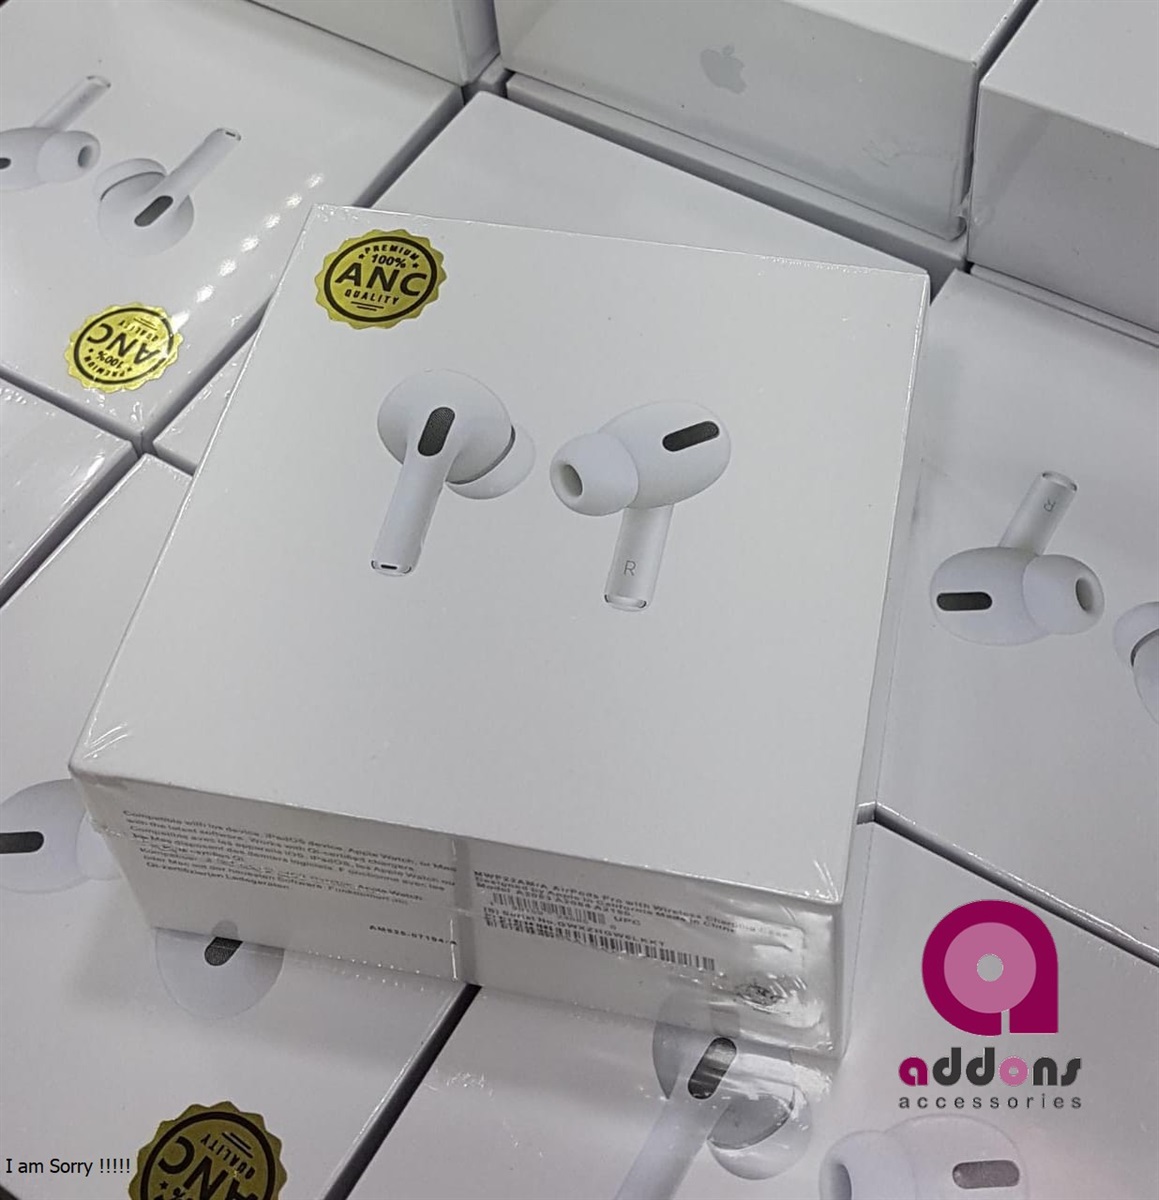 knus Ensomhed klo Apple 1:1 Airpods Pro ANC ( Master Replica ) in Pakistan for Rs. 4500.00 |  MicroXpert Addons